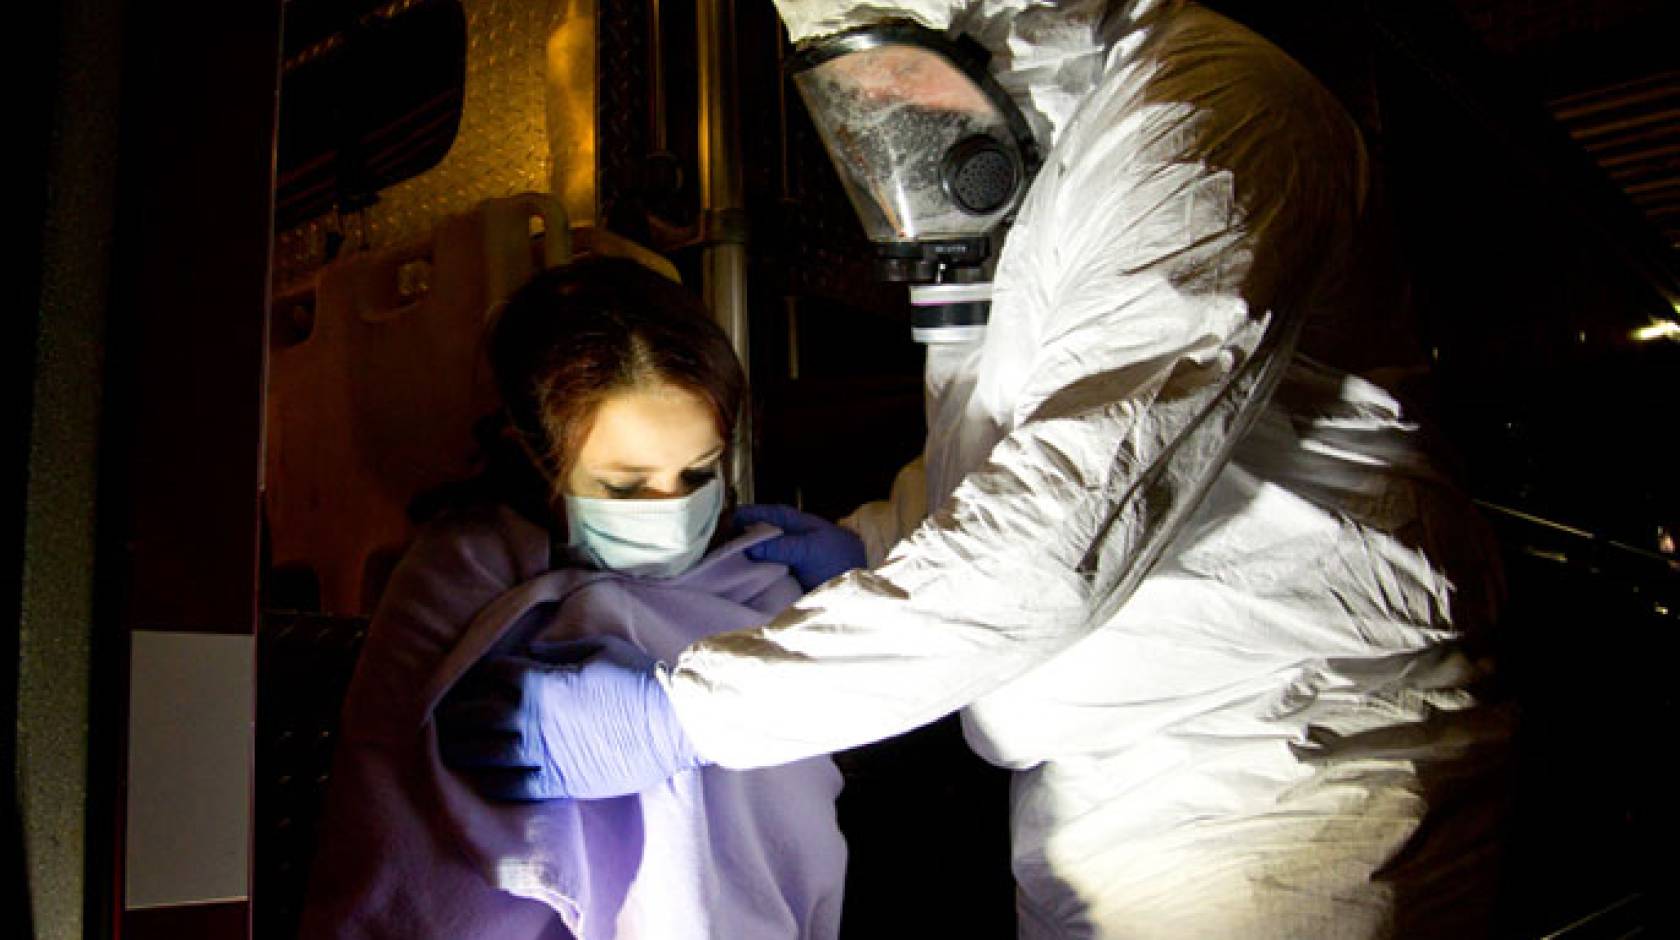 treating an Ebola patient